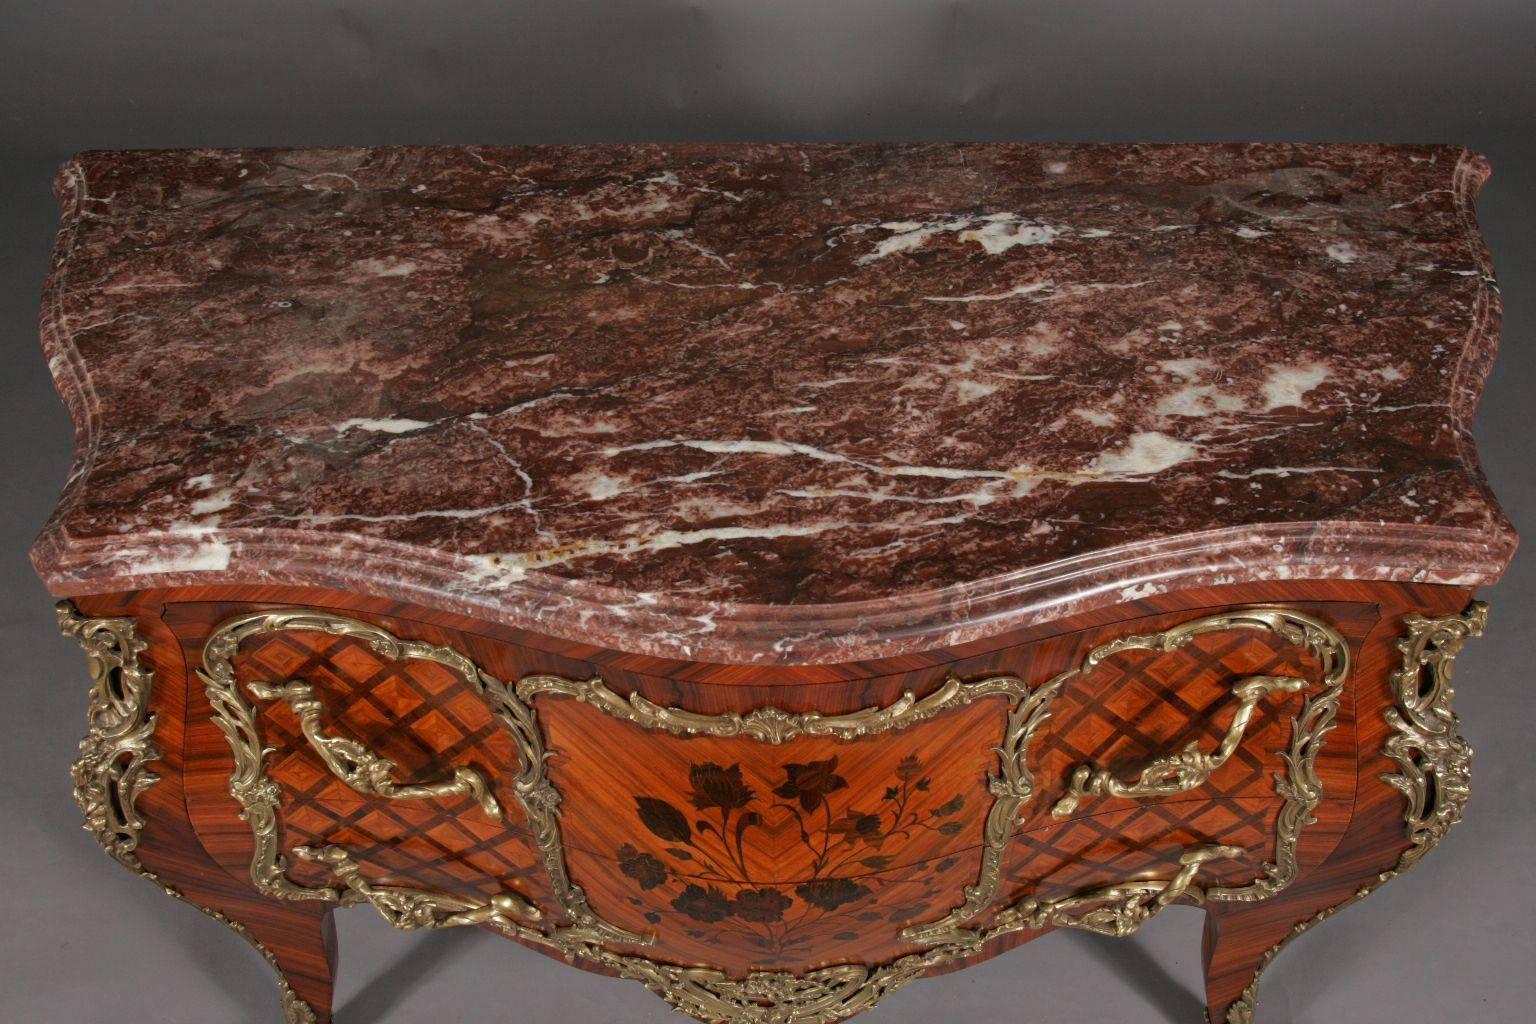 20th Century Louis XV style tulipwood french commode.
Real marble top and bronze fittings.
shadowed precious woods, veneered.

(D-Sam-55).